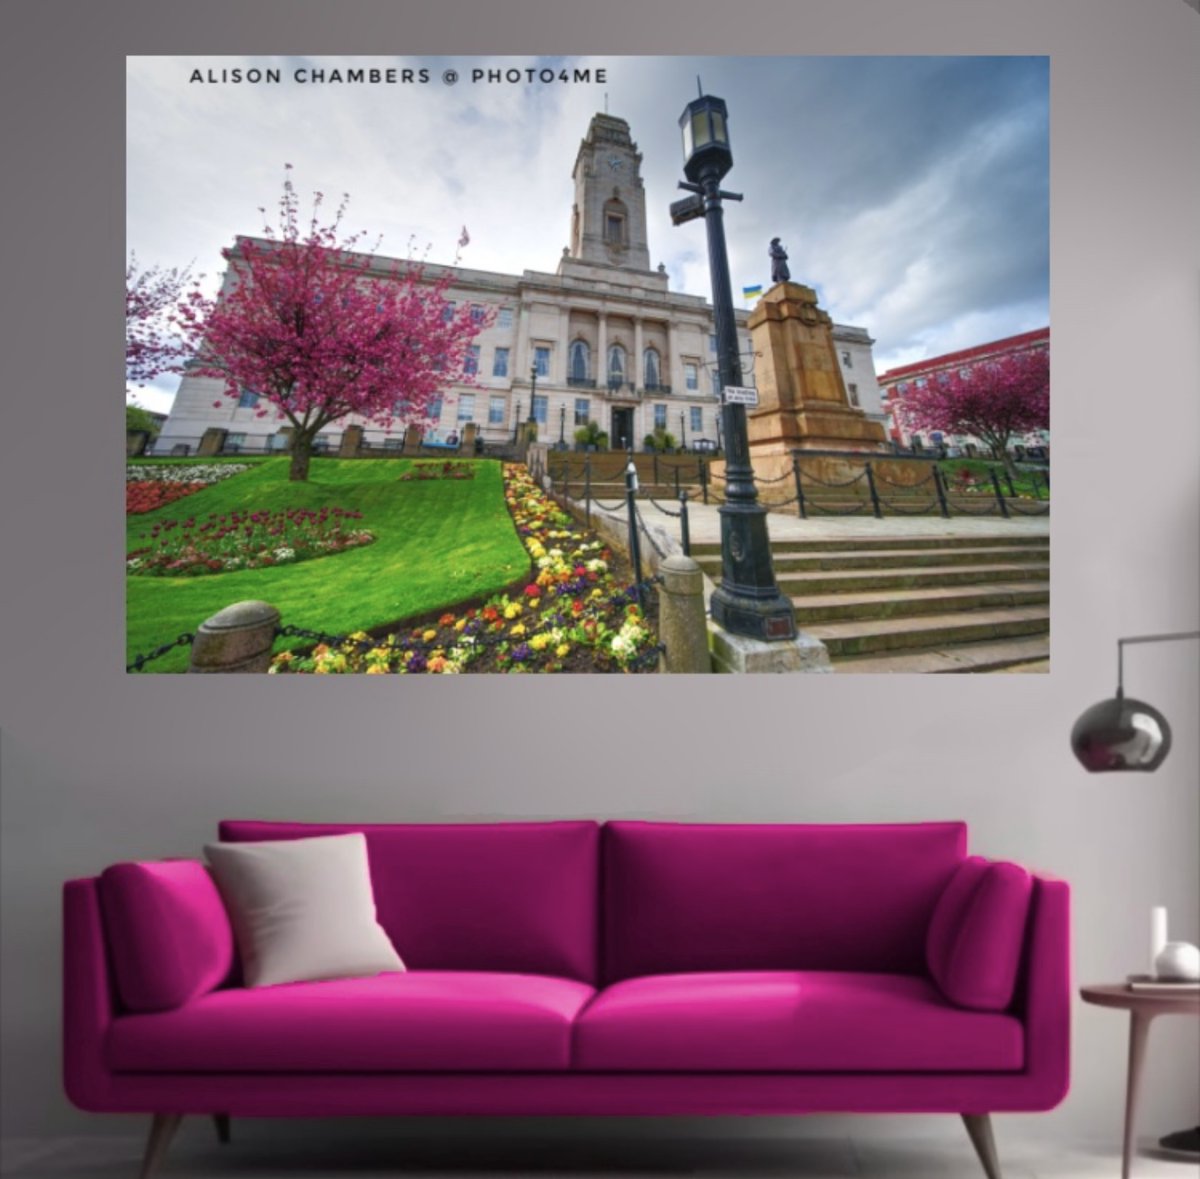 Barnsley Town Hall©️. Available from; shop.photo4me.com/1323843 & alisonchambers2.redbubble.com & 2-alison-chambers.pixels.com #barnsleyisbrill #barnsley #barnsleytownhall #BarnsleyTownCentre #barnsleysohthyorkshire